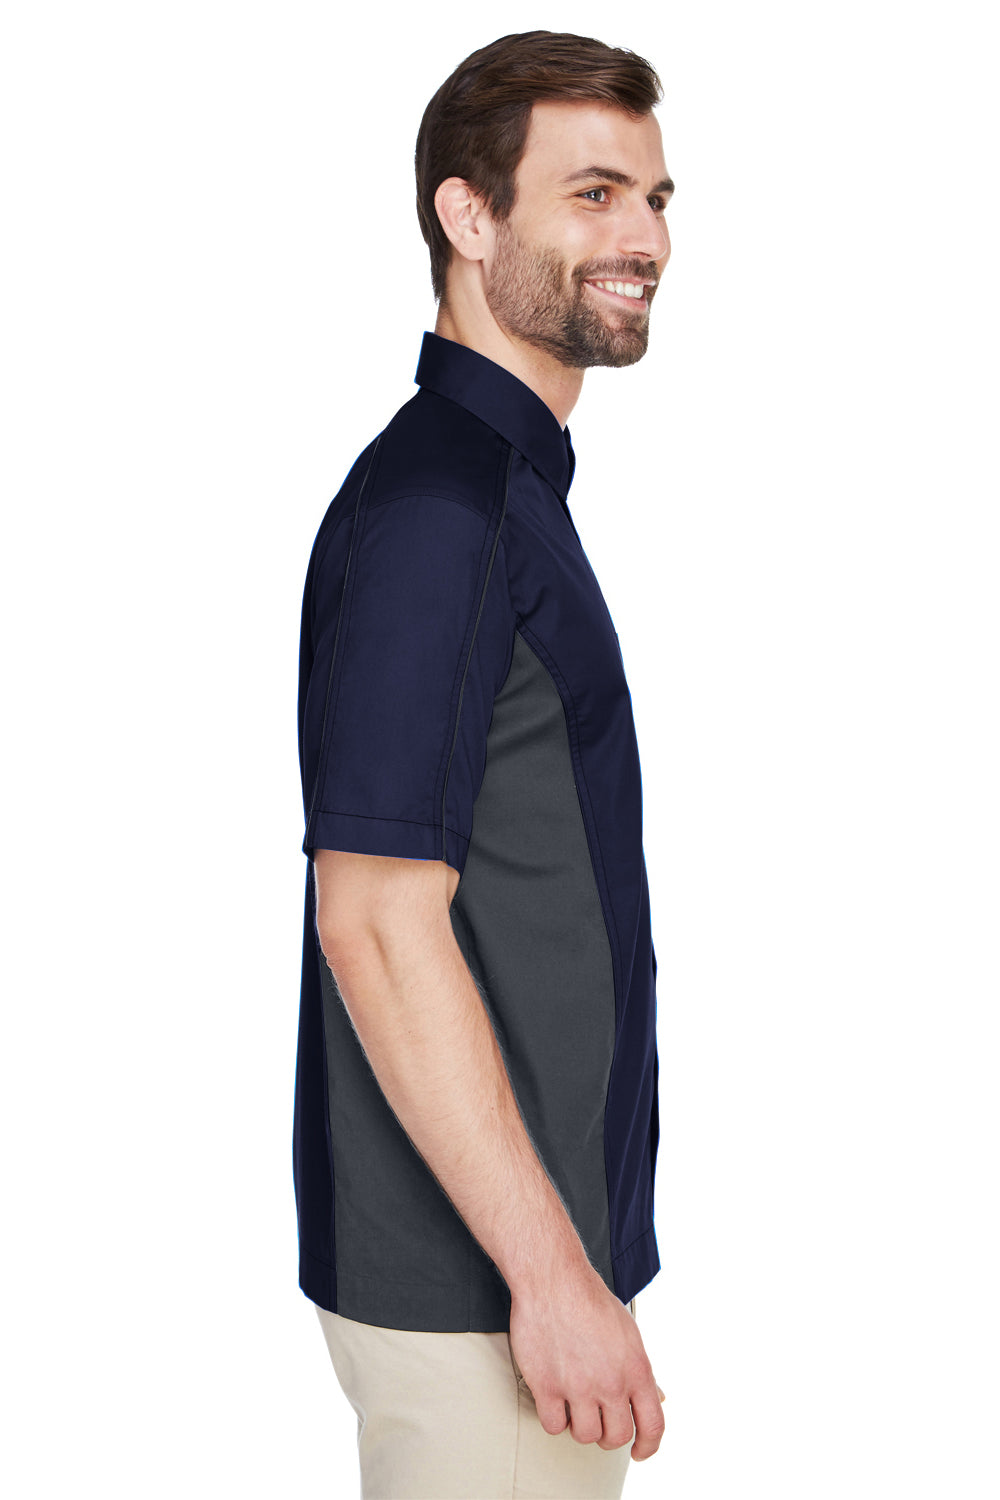 North End 87042 Mens Fuse Short Sleeve Button Down Shirt w/ Pocket Navy Blue/Grey Side